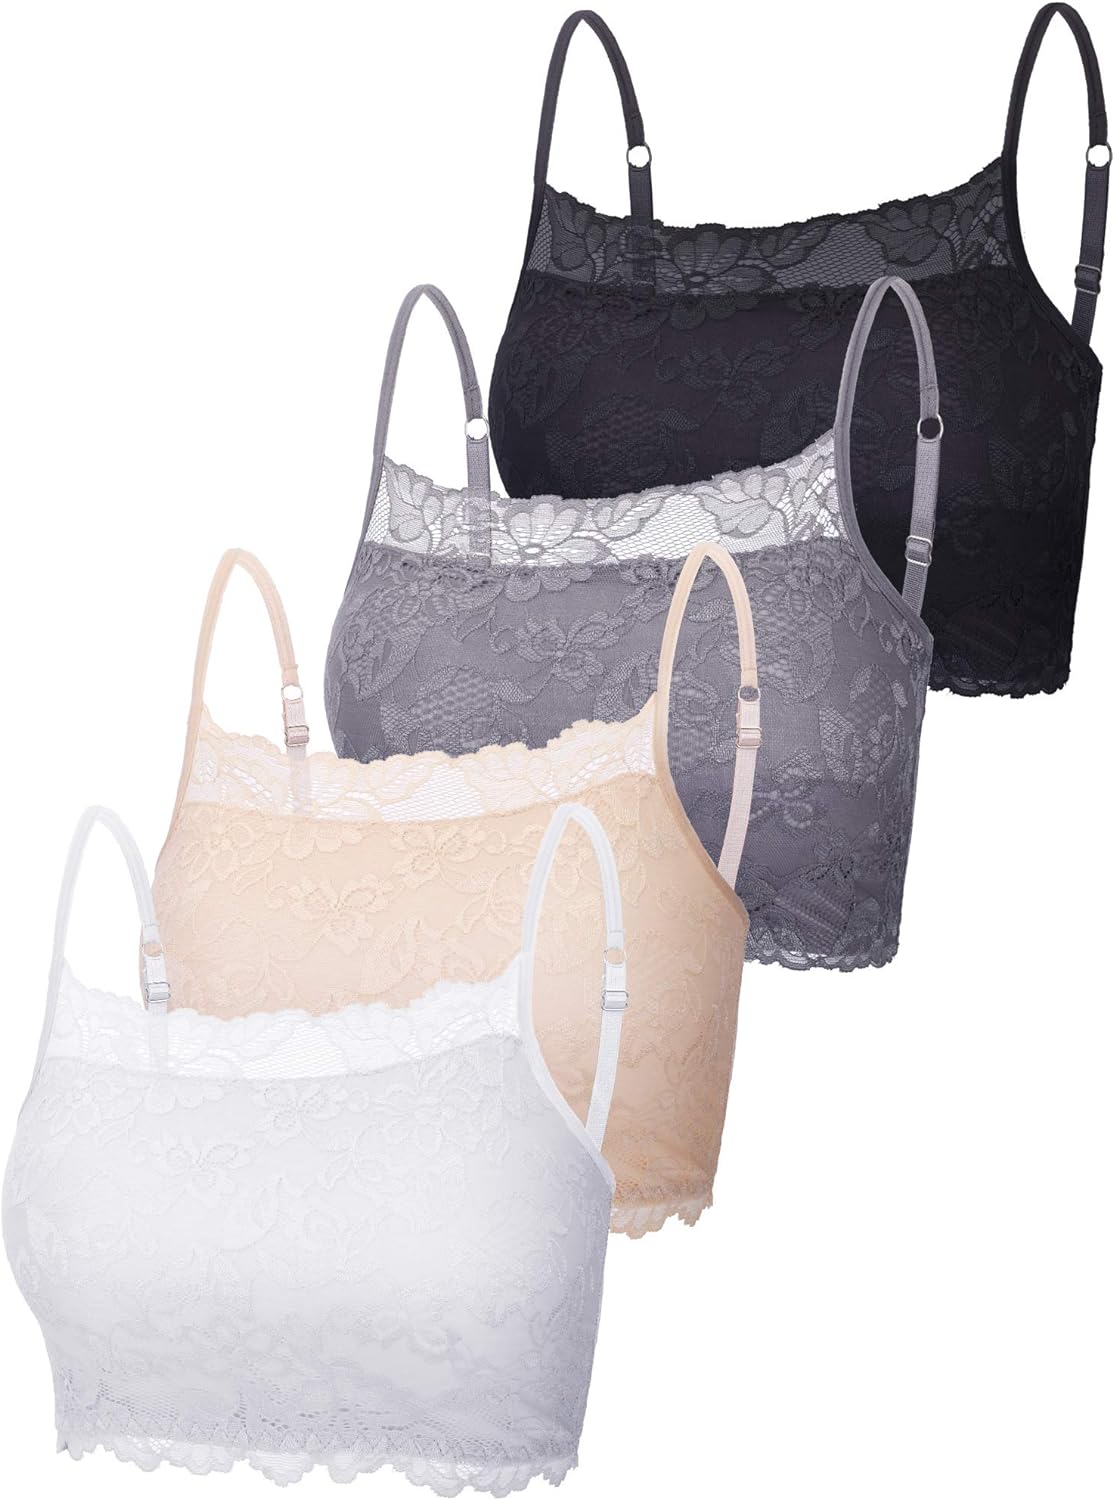 4 Pieces Women’s Lace Cami Stretch Lace Half Cami Breathable Lace Bralette Top for Women Girls